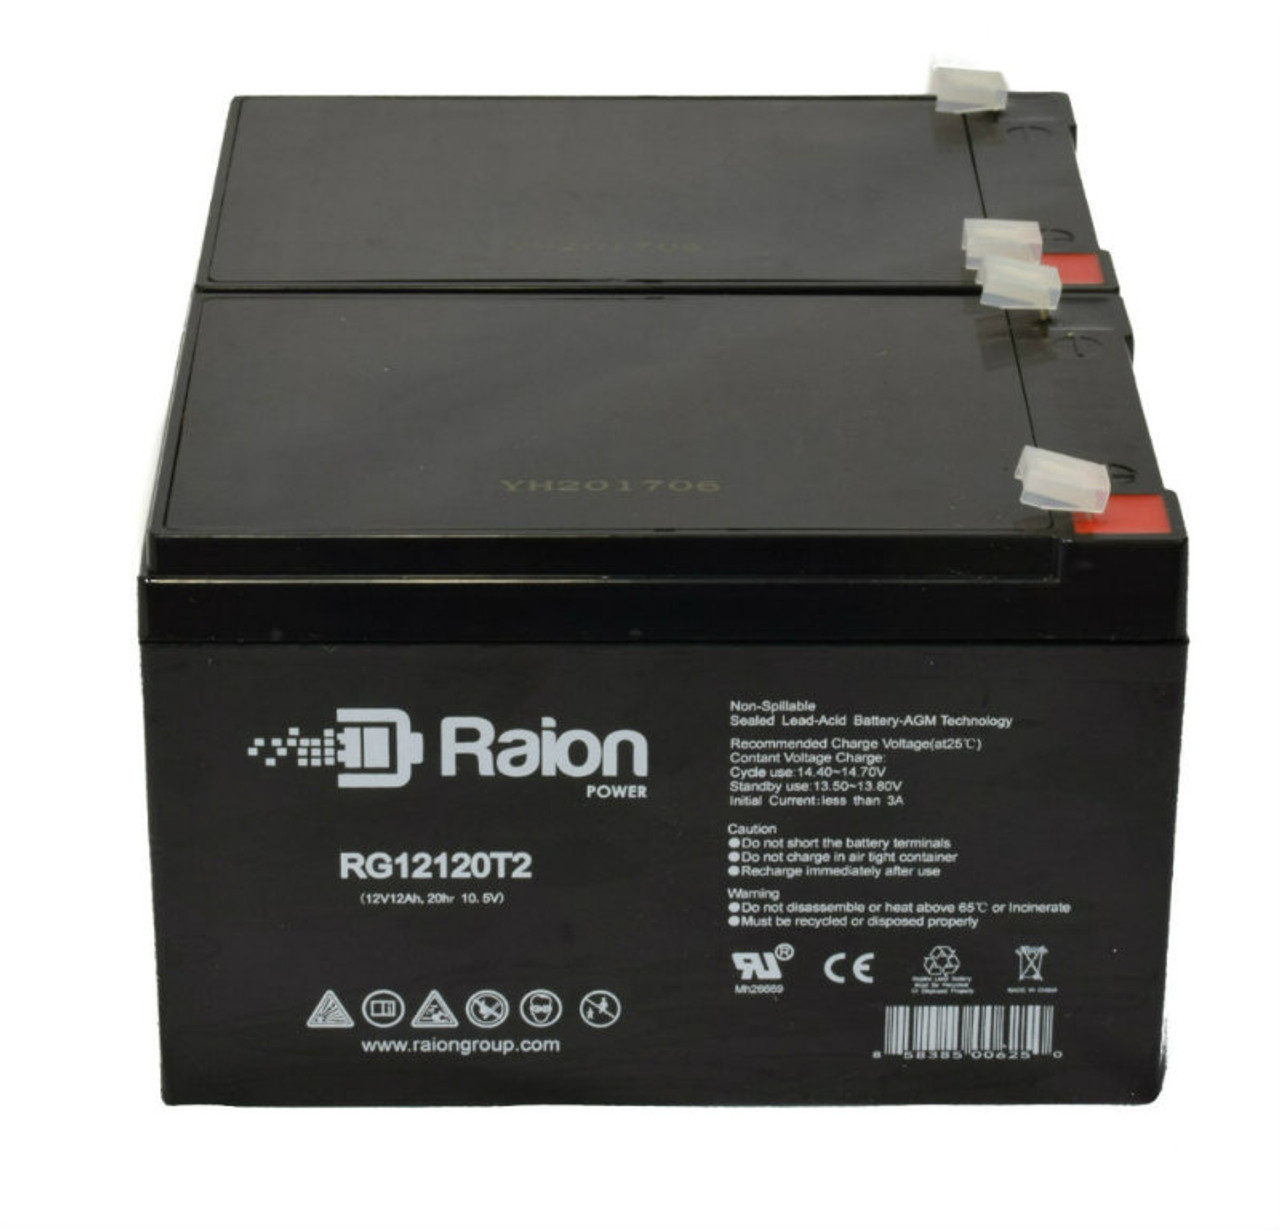 Raion Power RG12120T2 Replacement Emergency Light Battery for Dyna-Ray 12 - 2 Pack